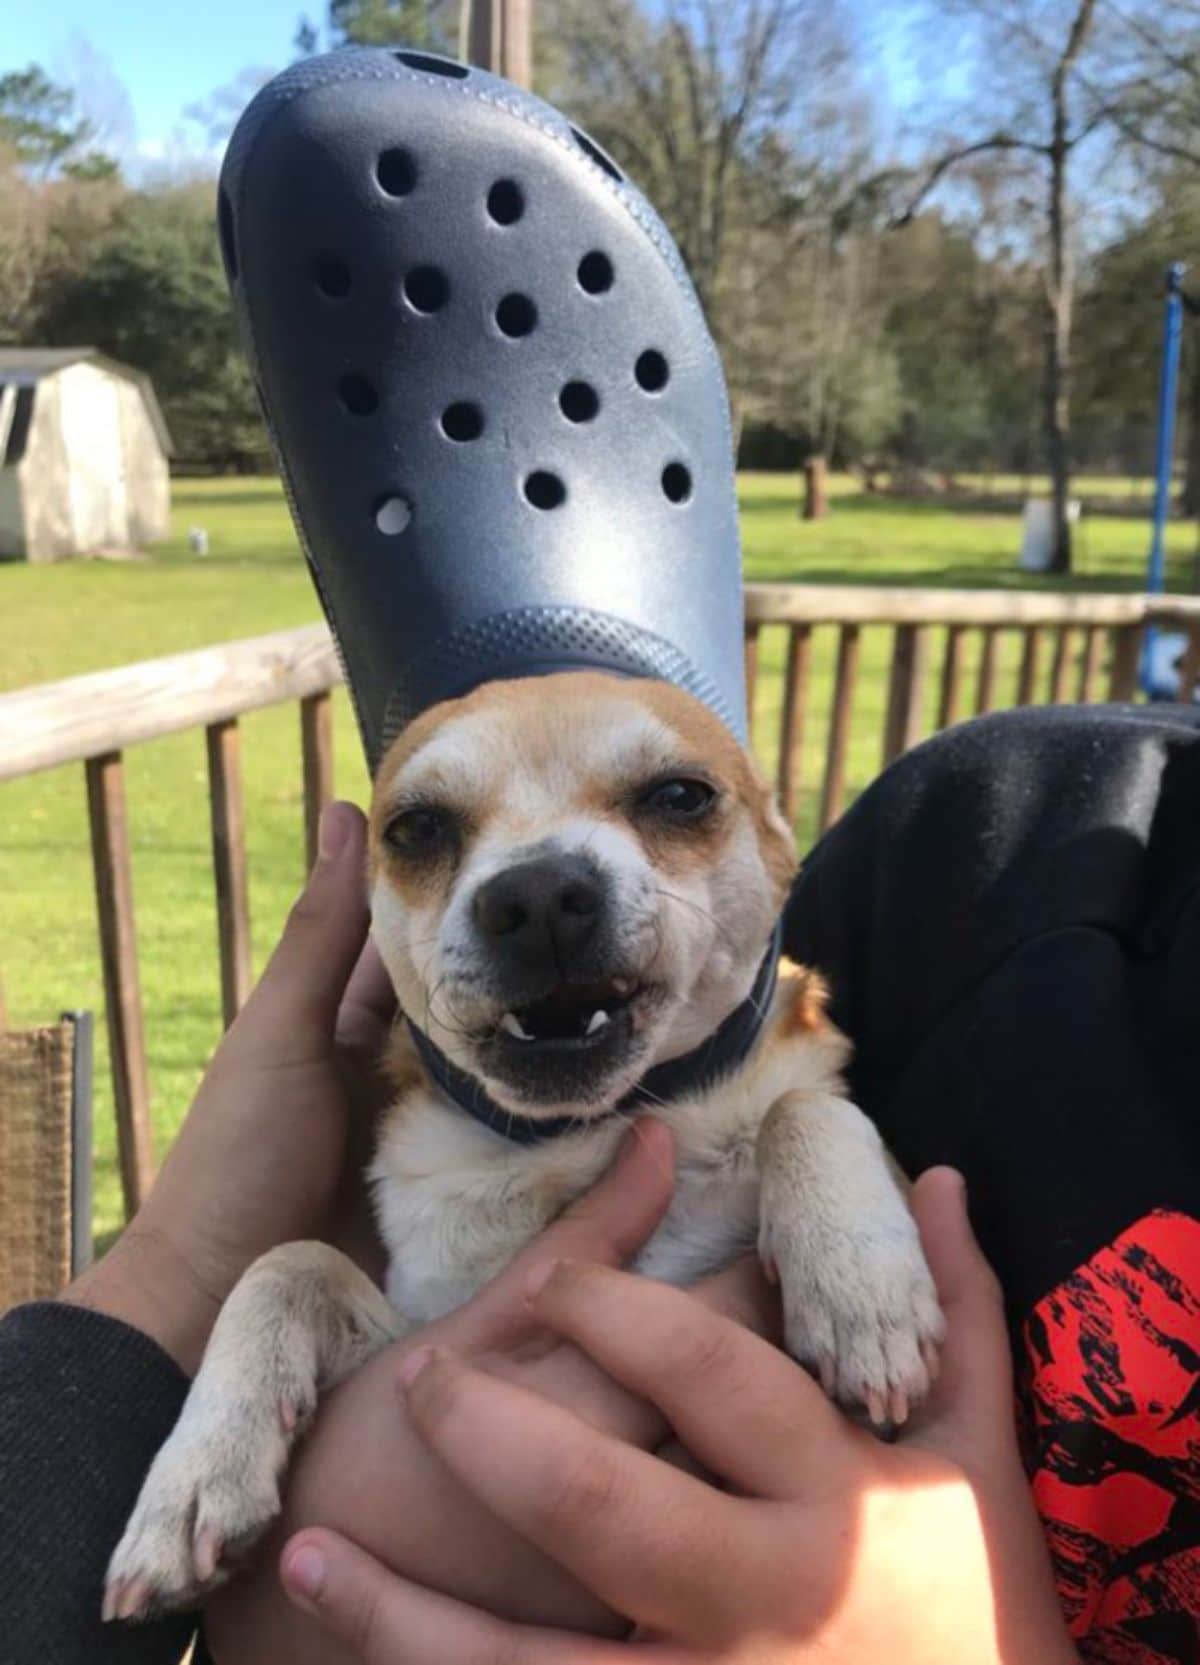 brown and white dog being held by someone and wearing blue crocs slipper on the head